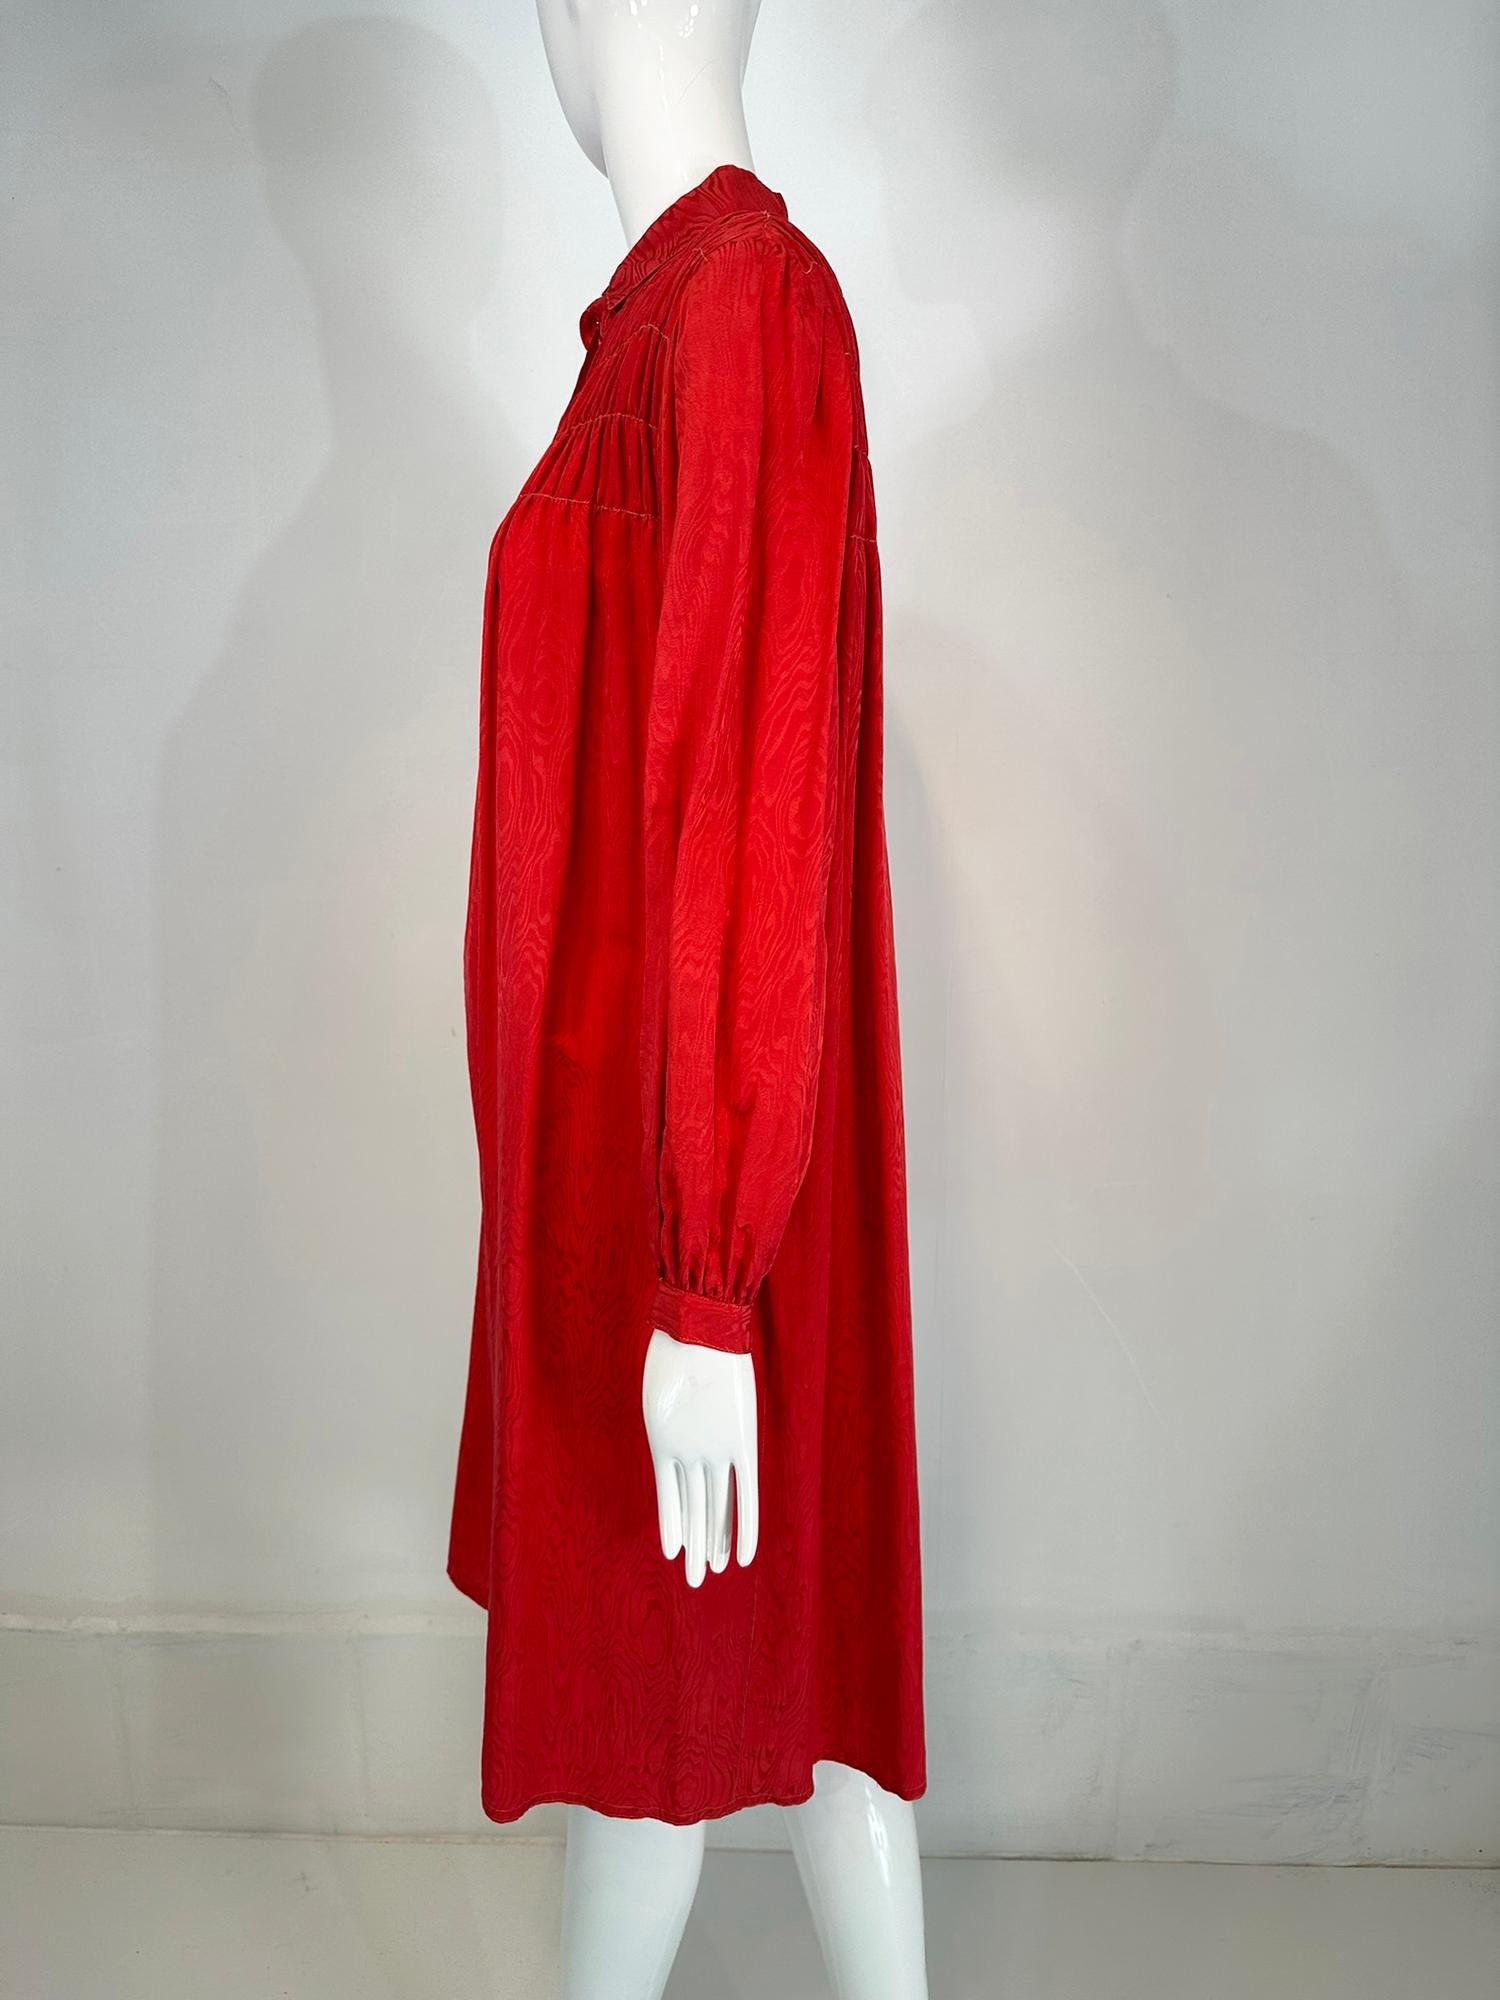 Women's Geoffrey Beene Coral Red Silk Jacquard Smock Dress 1970s For Sale